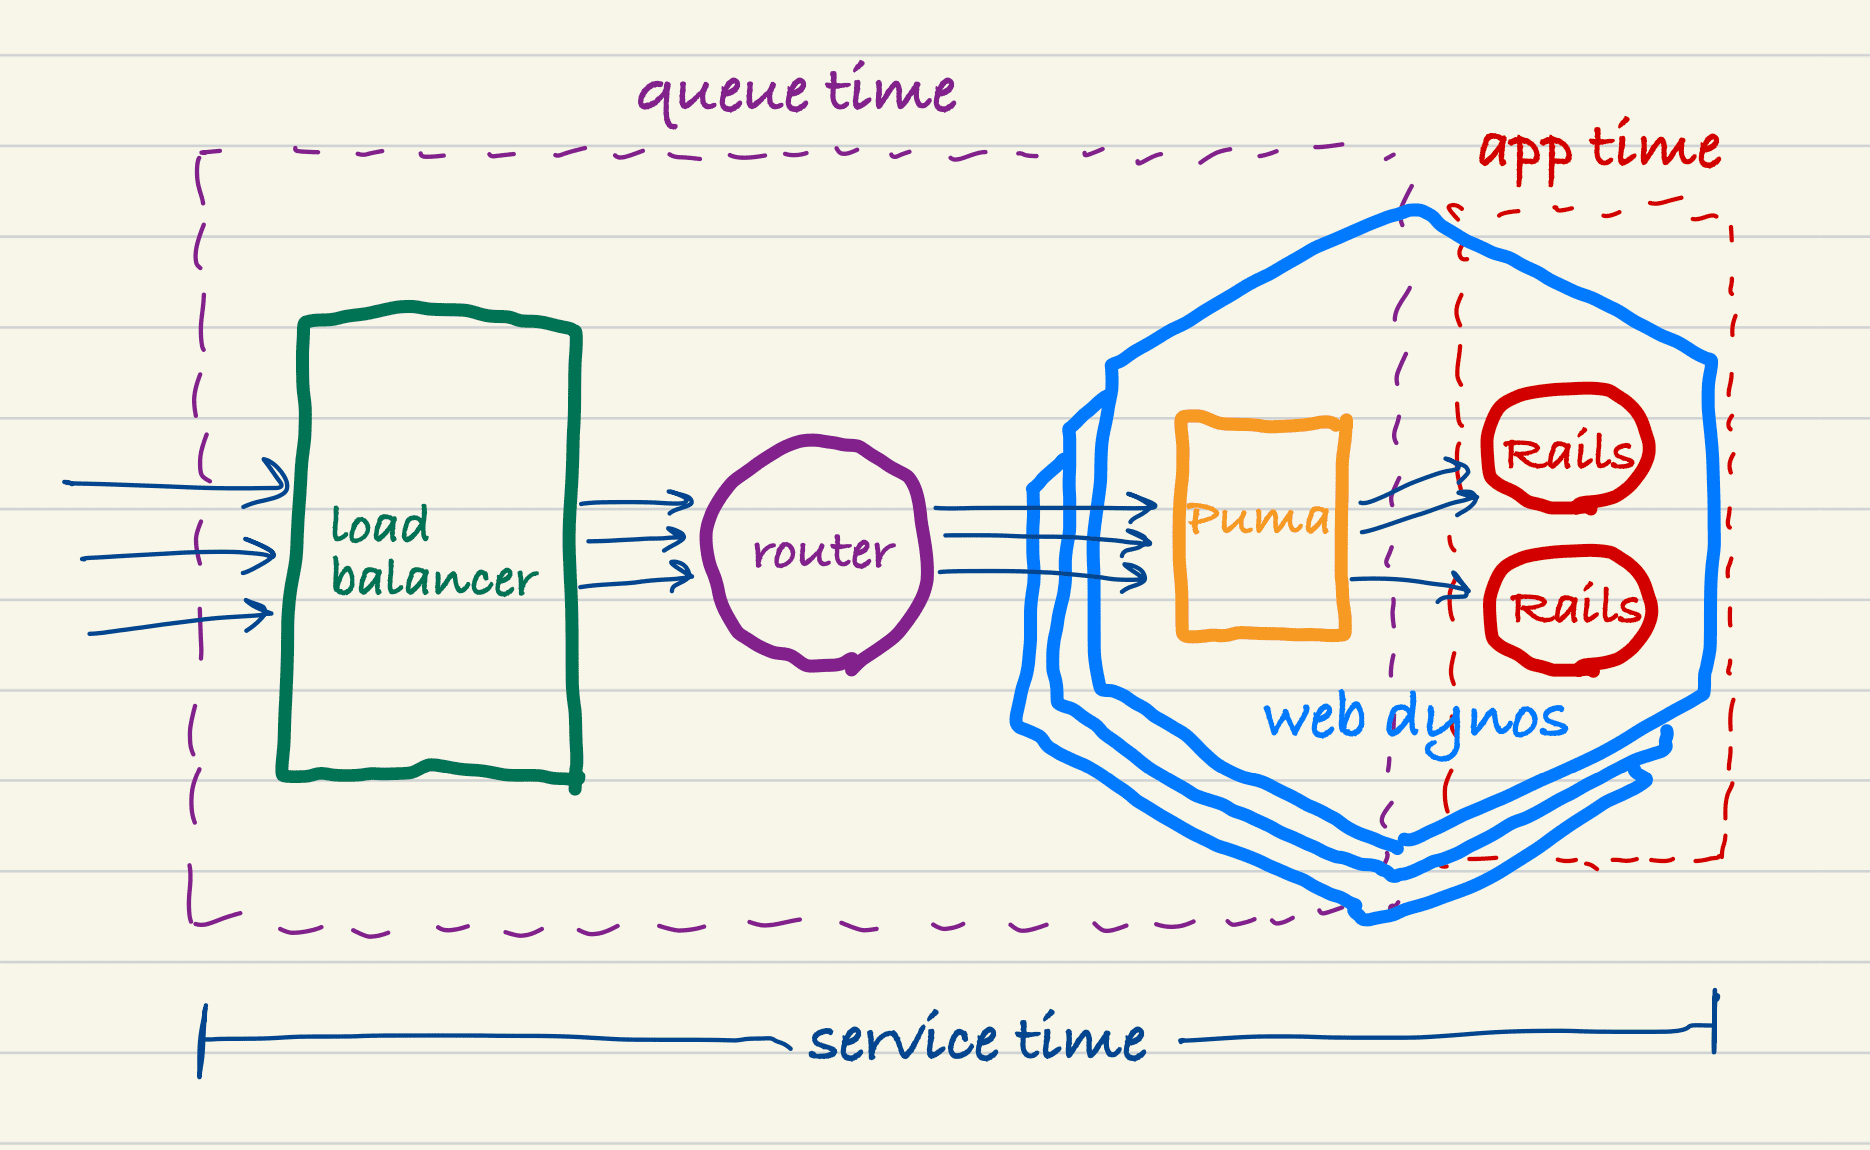 Illustration of service time, app time, and queue time